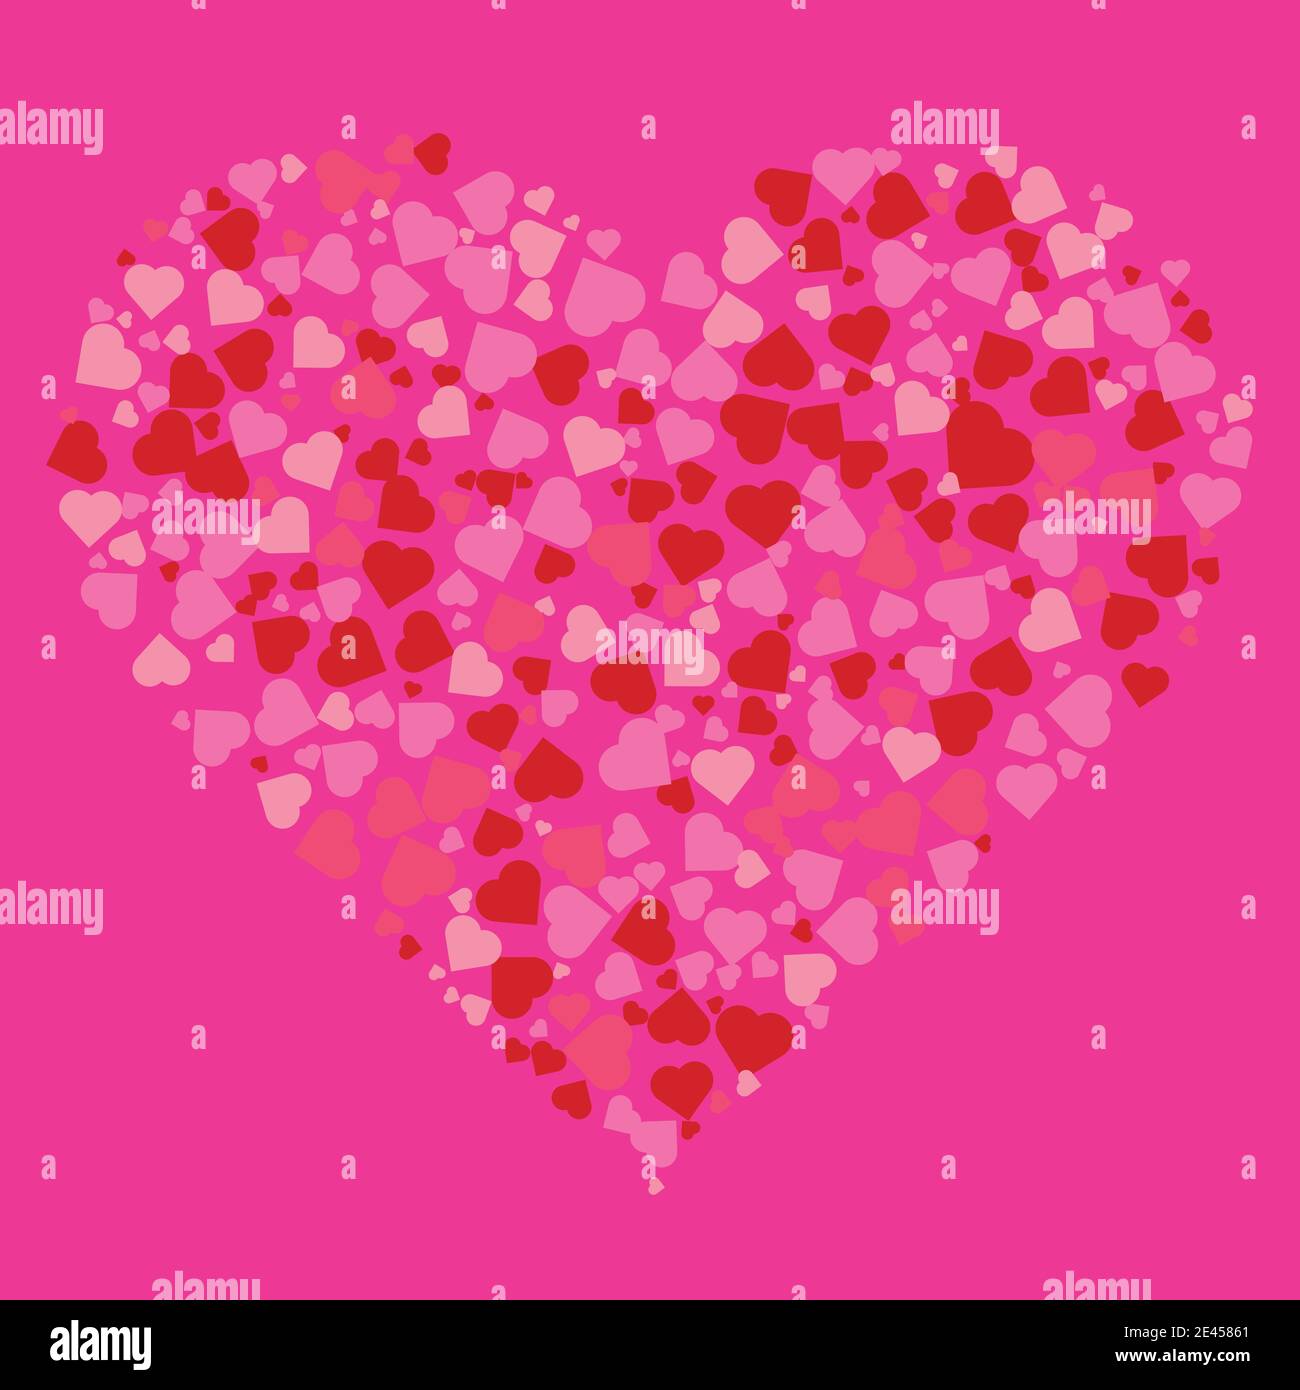 Love makes blind. Conceptual vector illustration with heart shape made of smaller hearts. Stock Vector